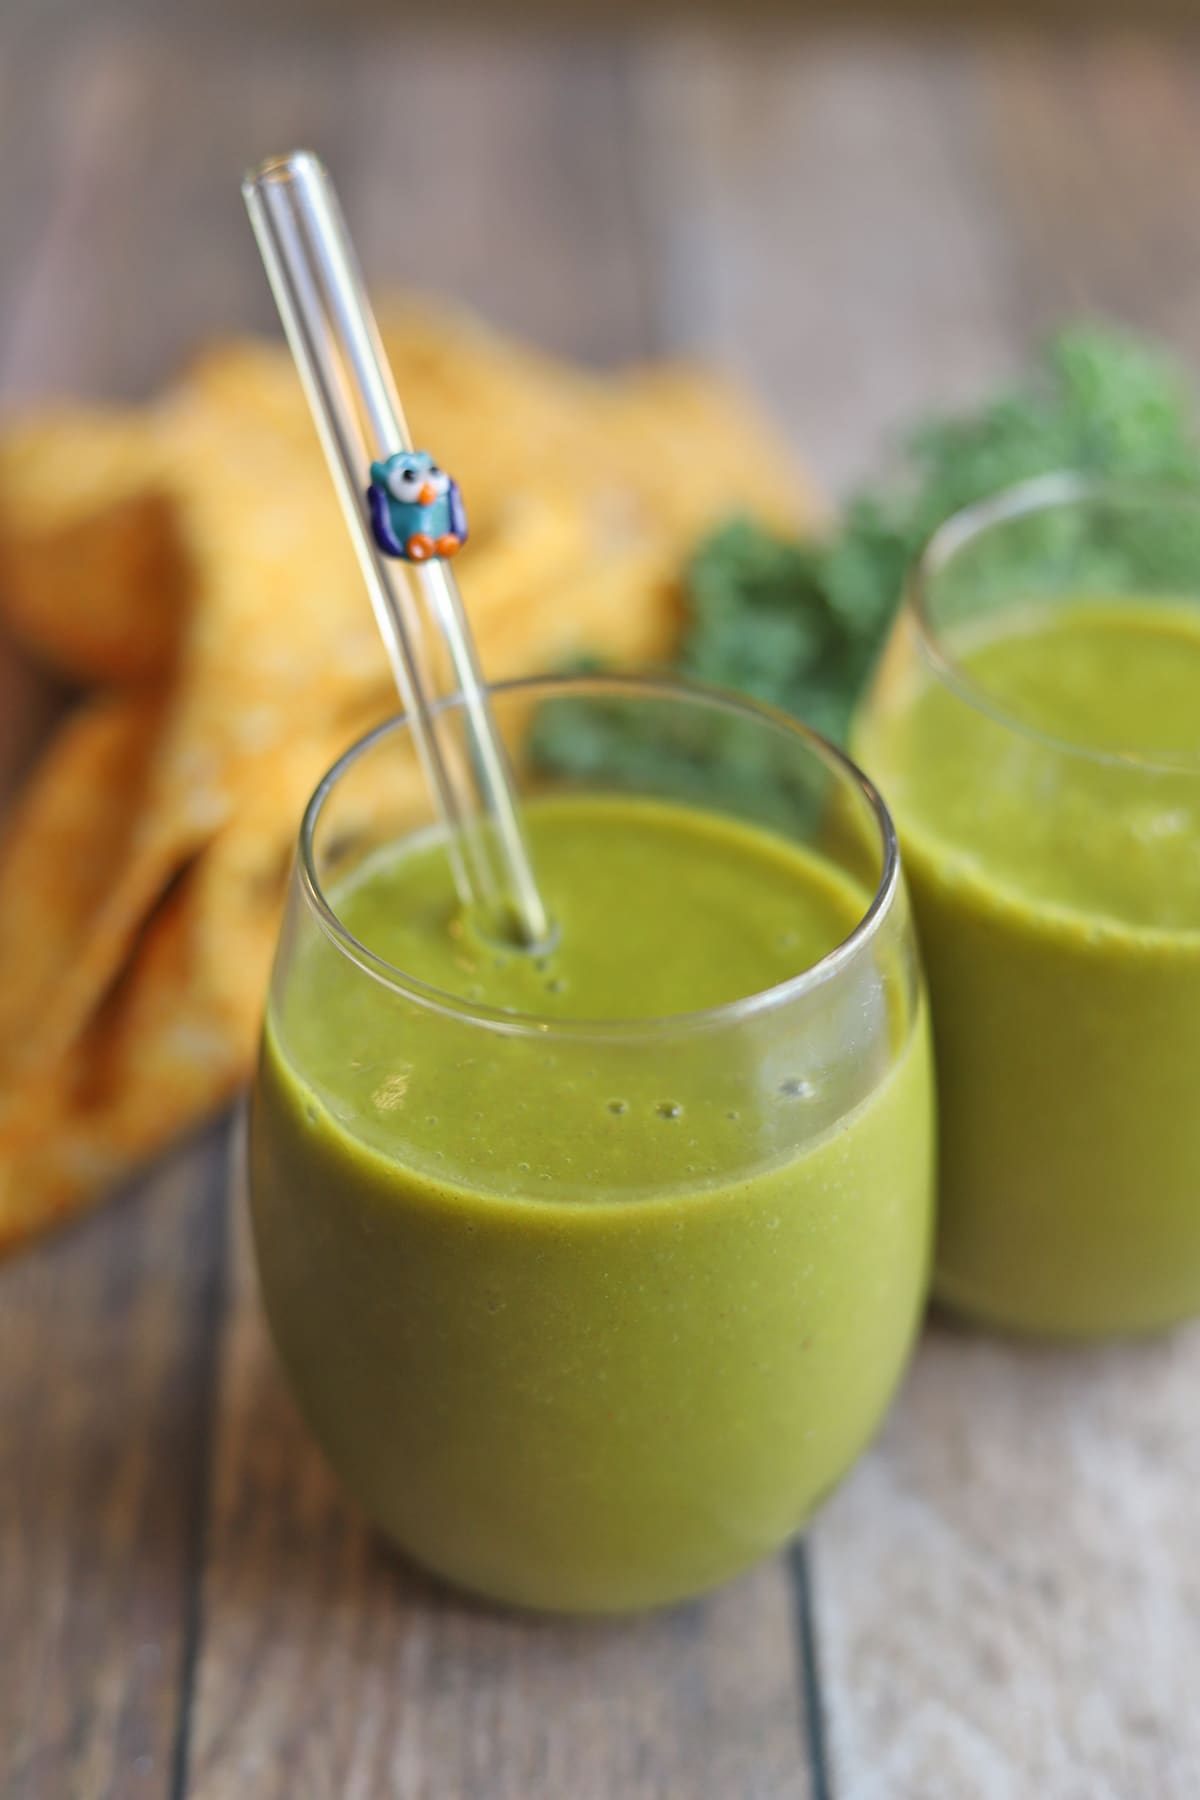 Pumpkin smoothie in glasses by kale leaves.